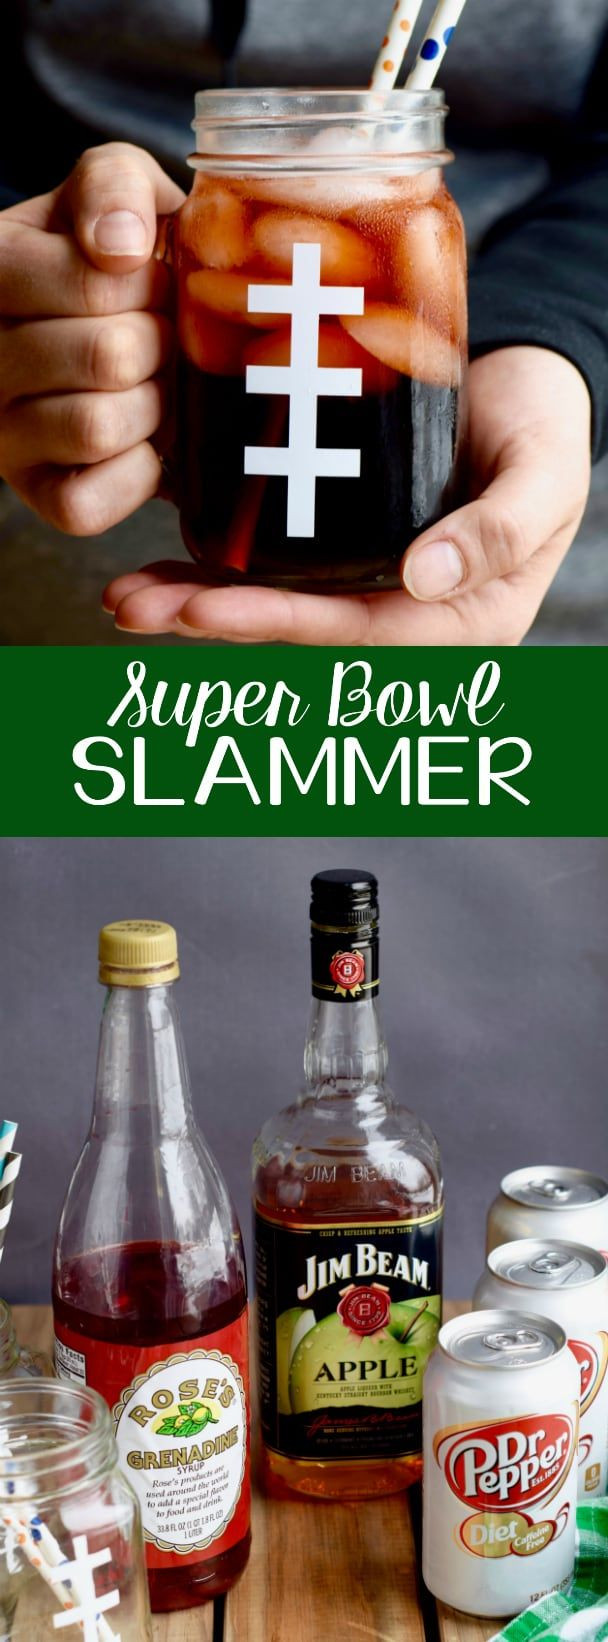 Super Bowl Drink Recipes
 This Super Bowl Slammer Drink Recipe is a great quick way